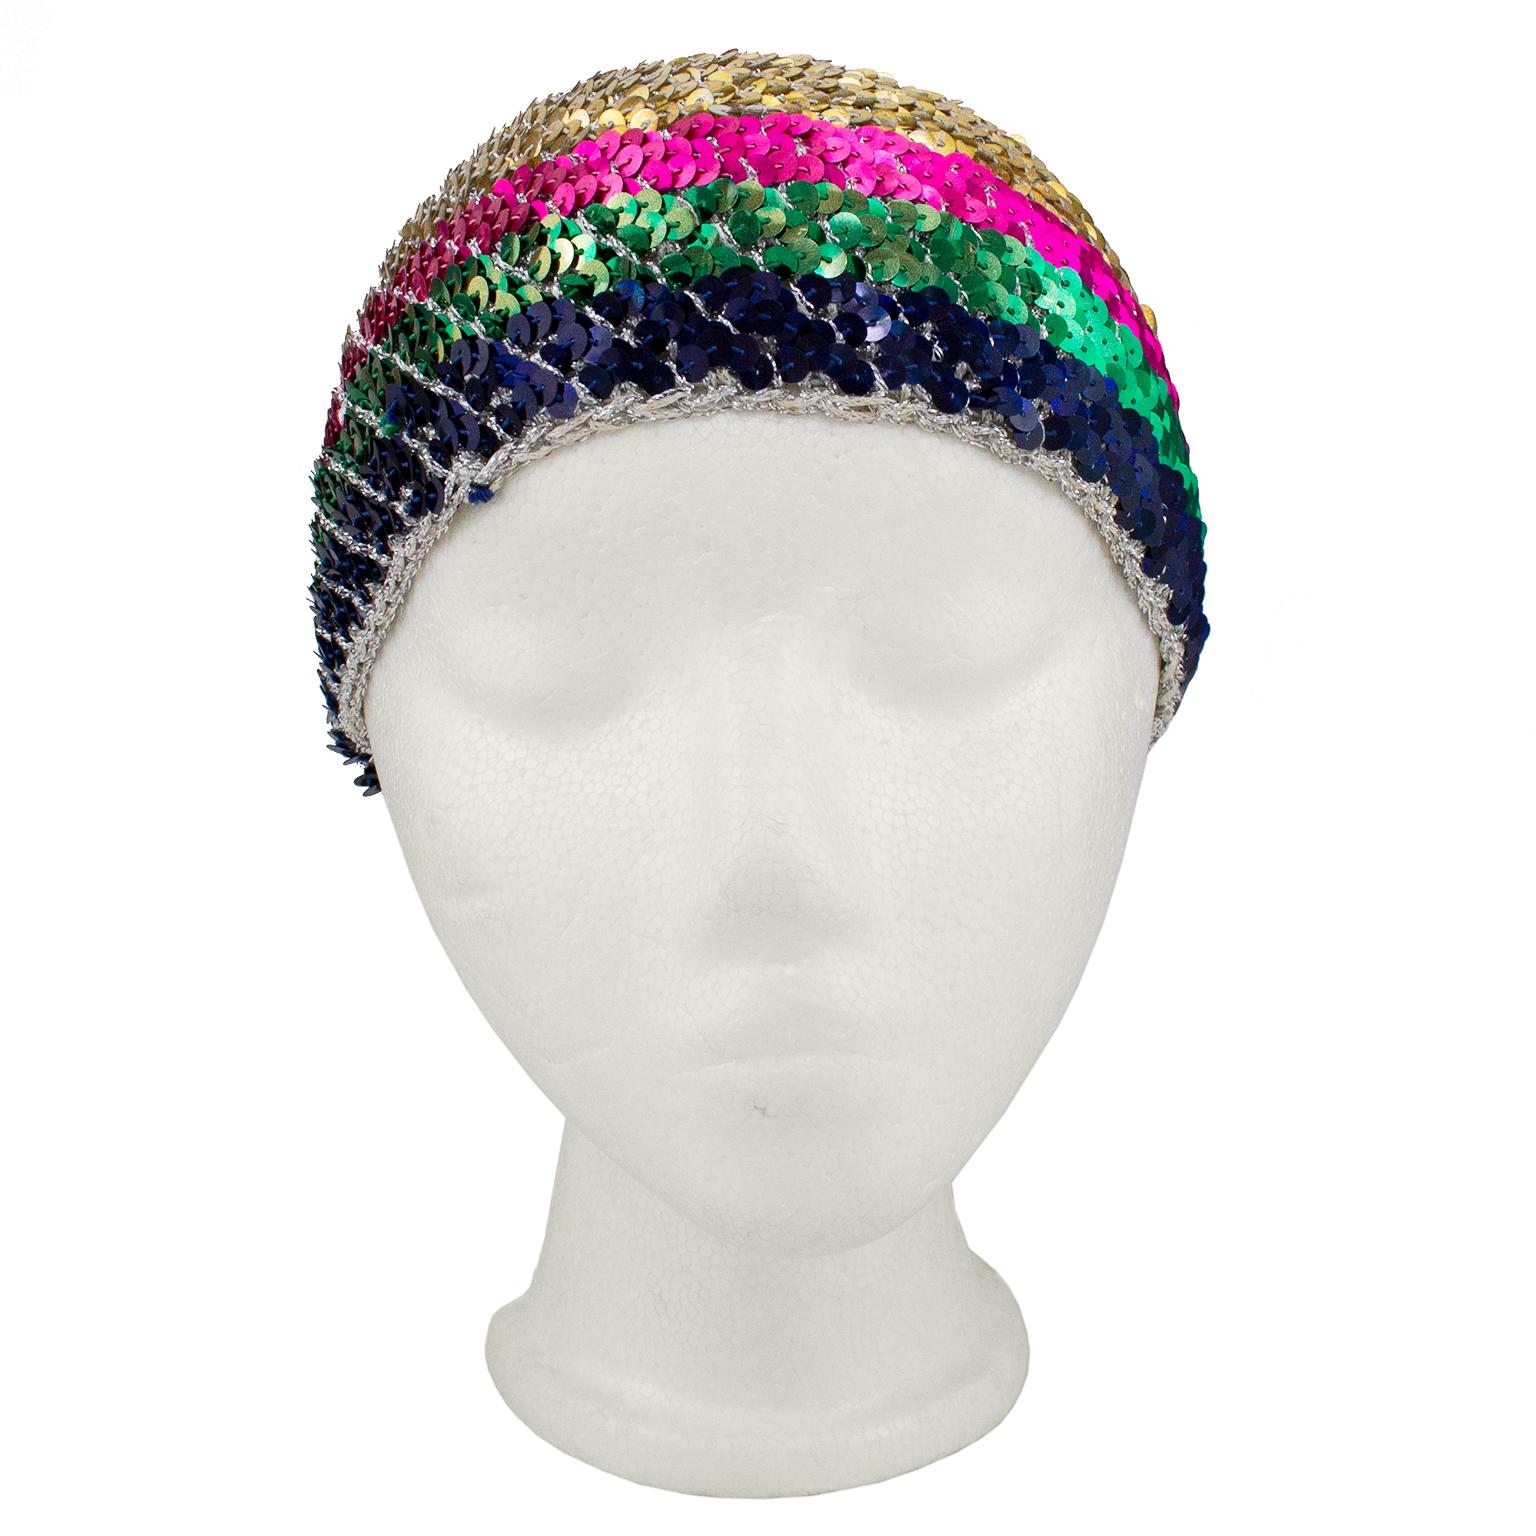 Roy Halston Frowick began his career as a hat designer. He was best known for his pillbox style creations before expanding into women's wear and revolutionizing the way his jet set clients dressed for daytime to disco nights. This rainbow sequin and